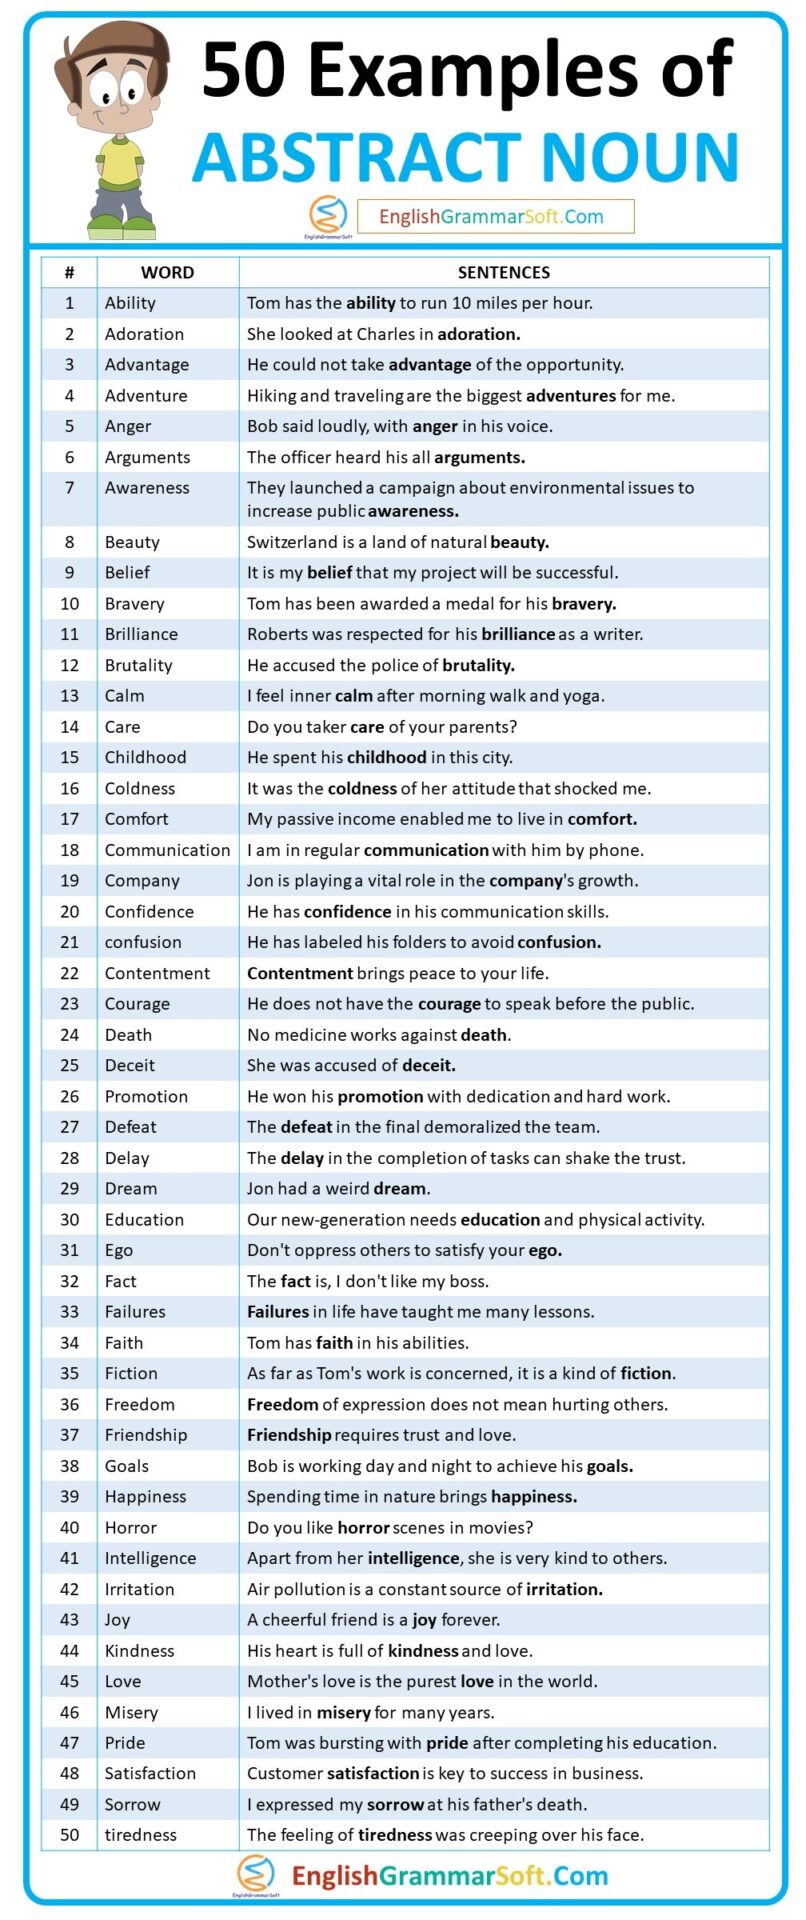 50 Examples of Abstract Nouns